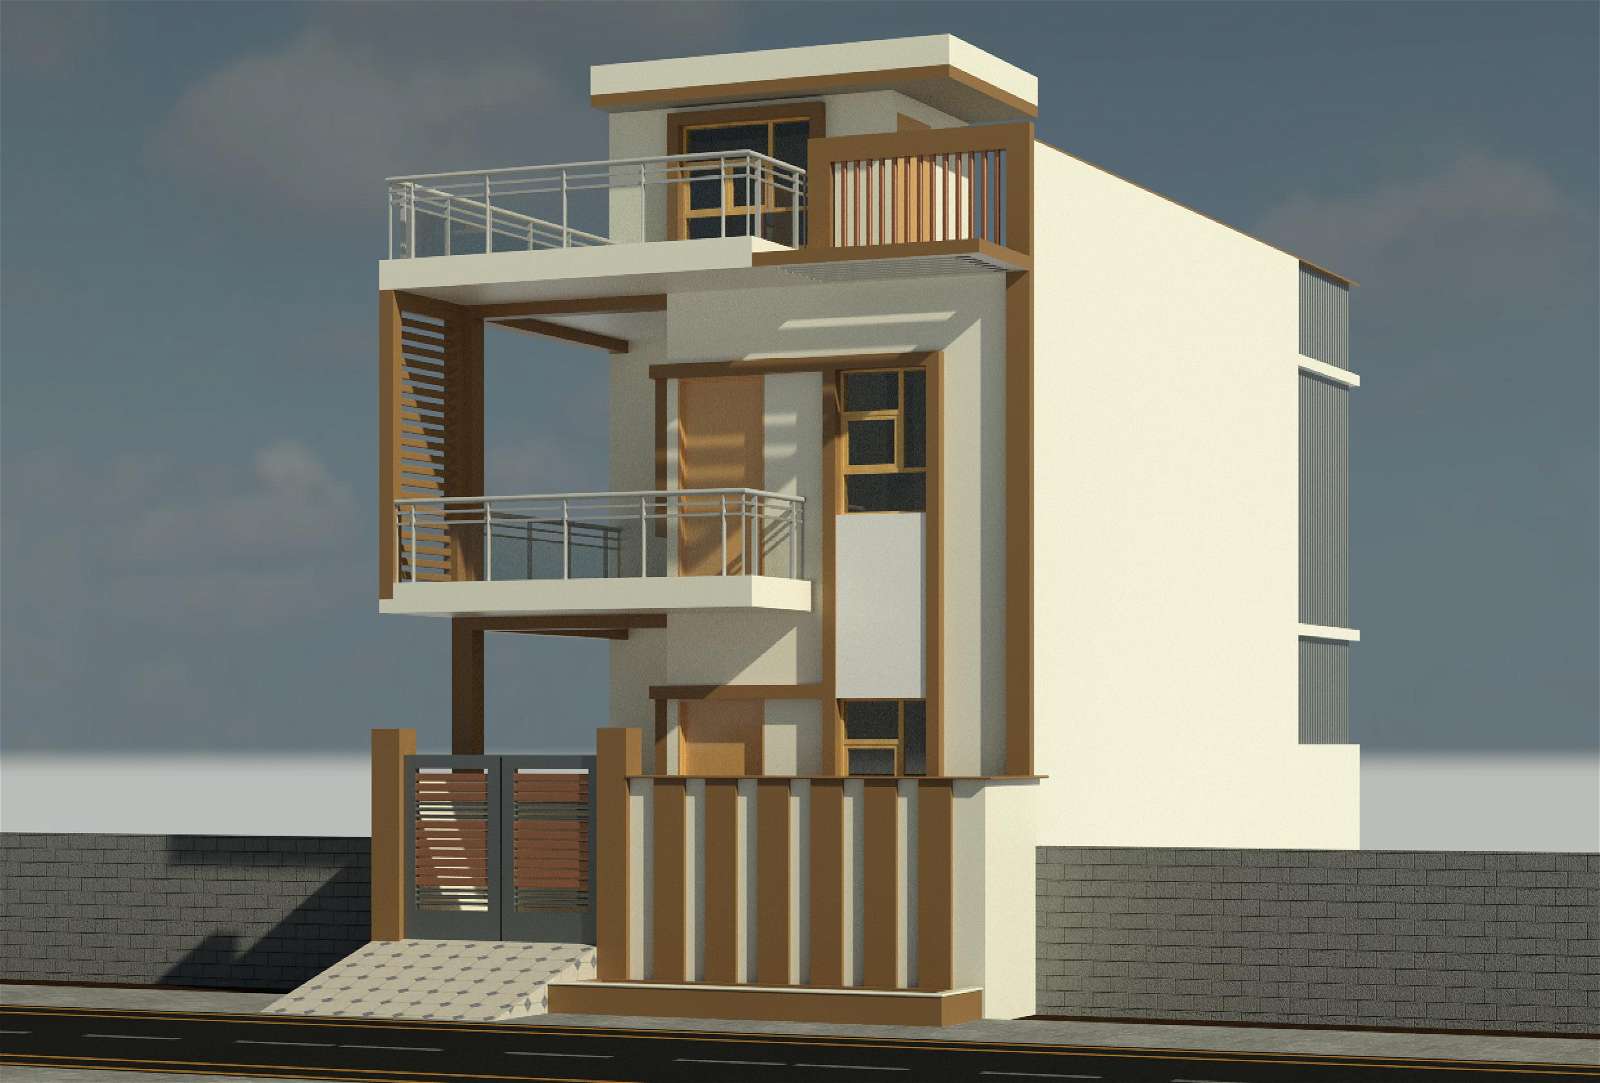 Perfect 3d house elevation design. Download this drawing